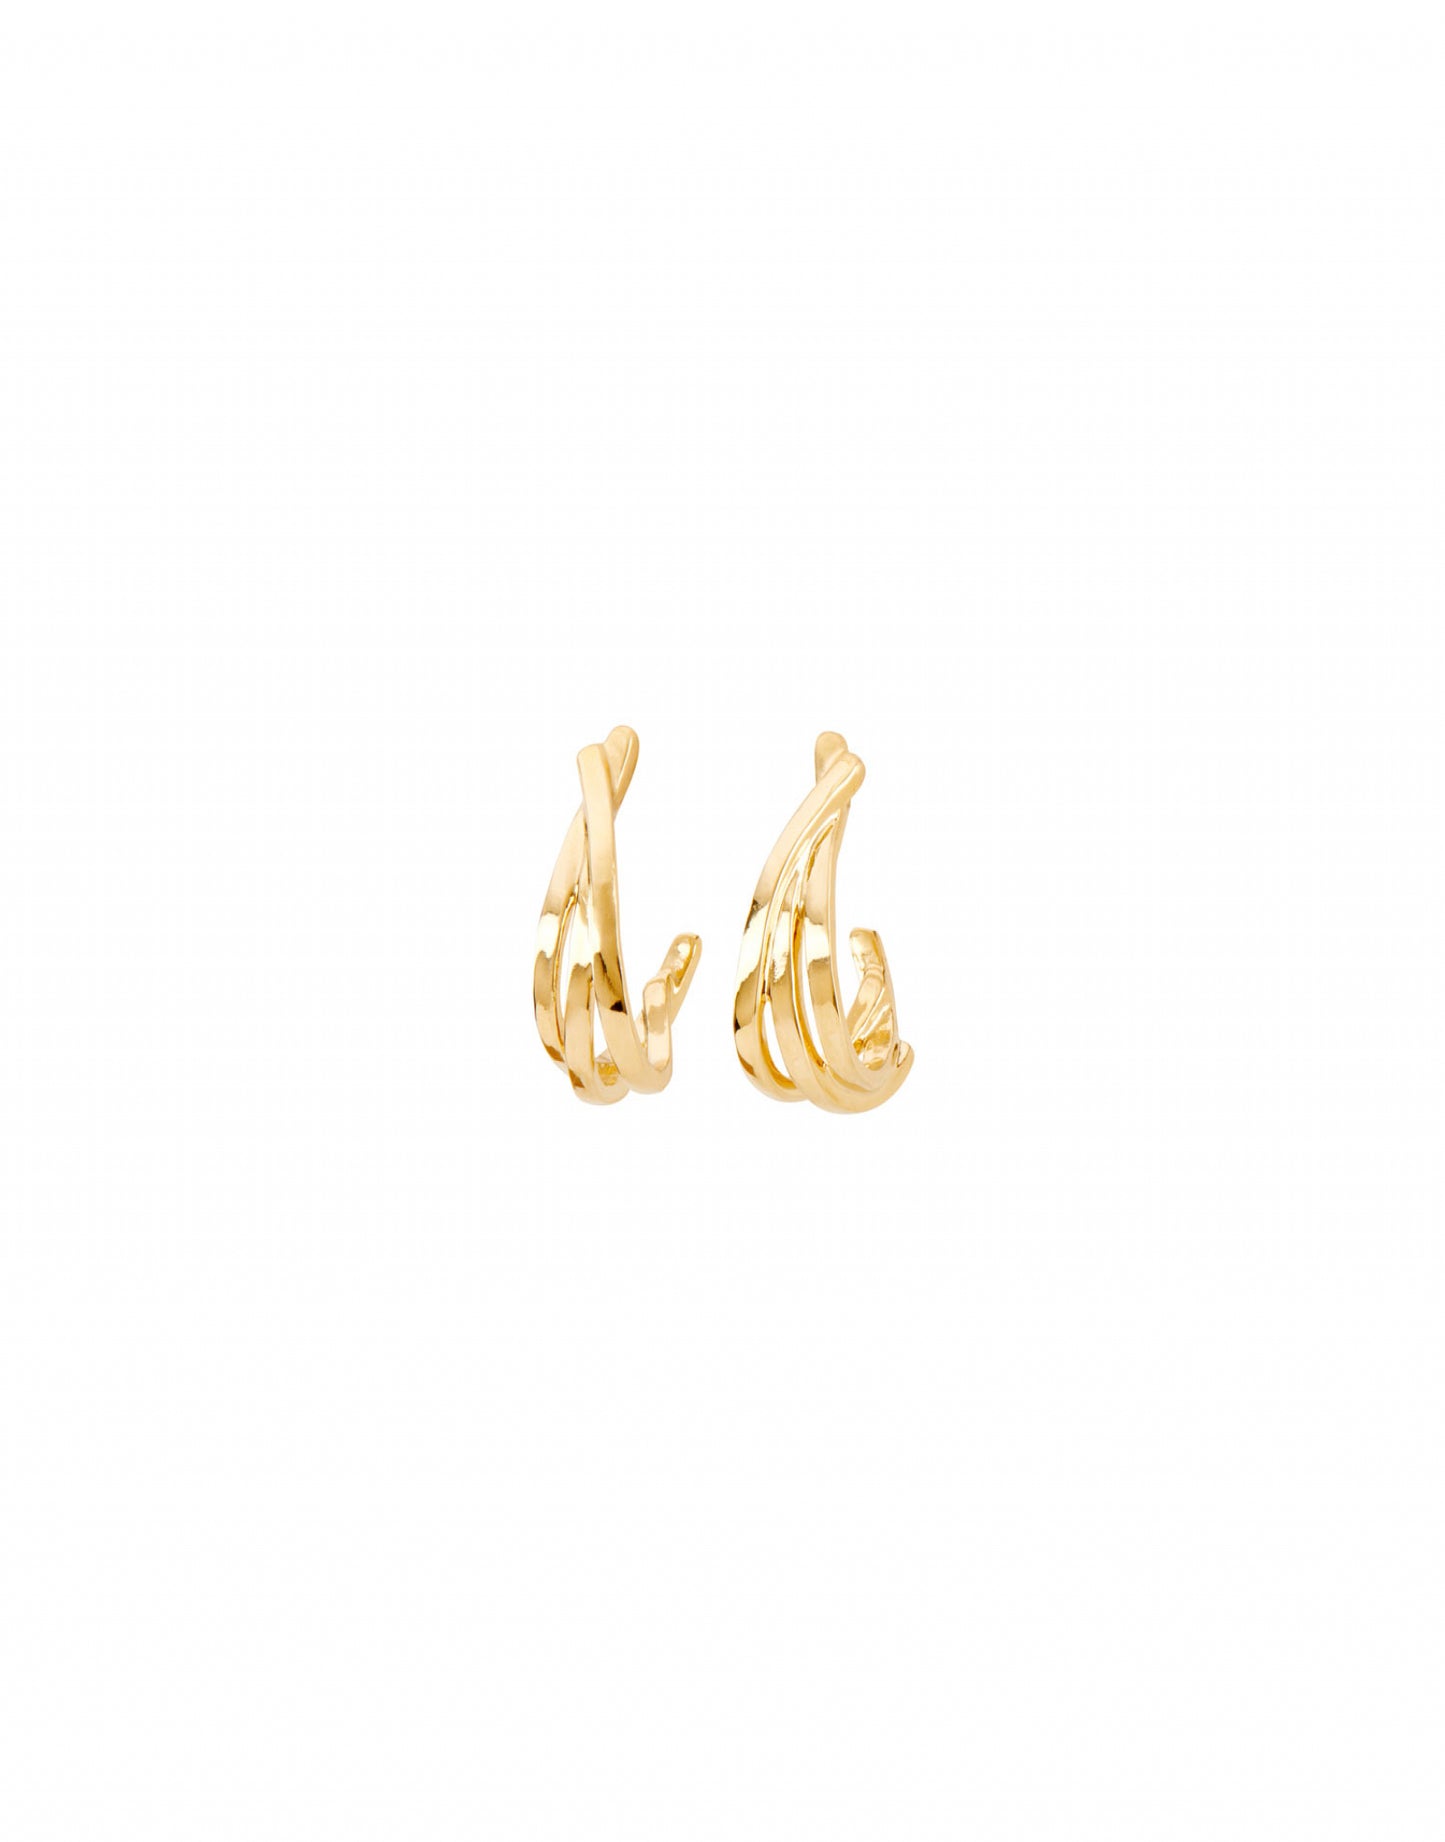 UNO DE 50 UNOde50 - Gold Nihiwatu Beach Earrings available at The Good Life Boutique